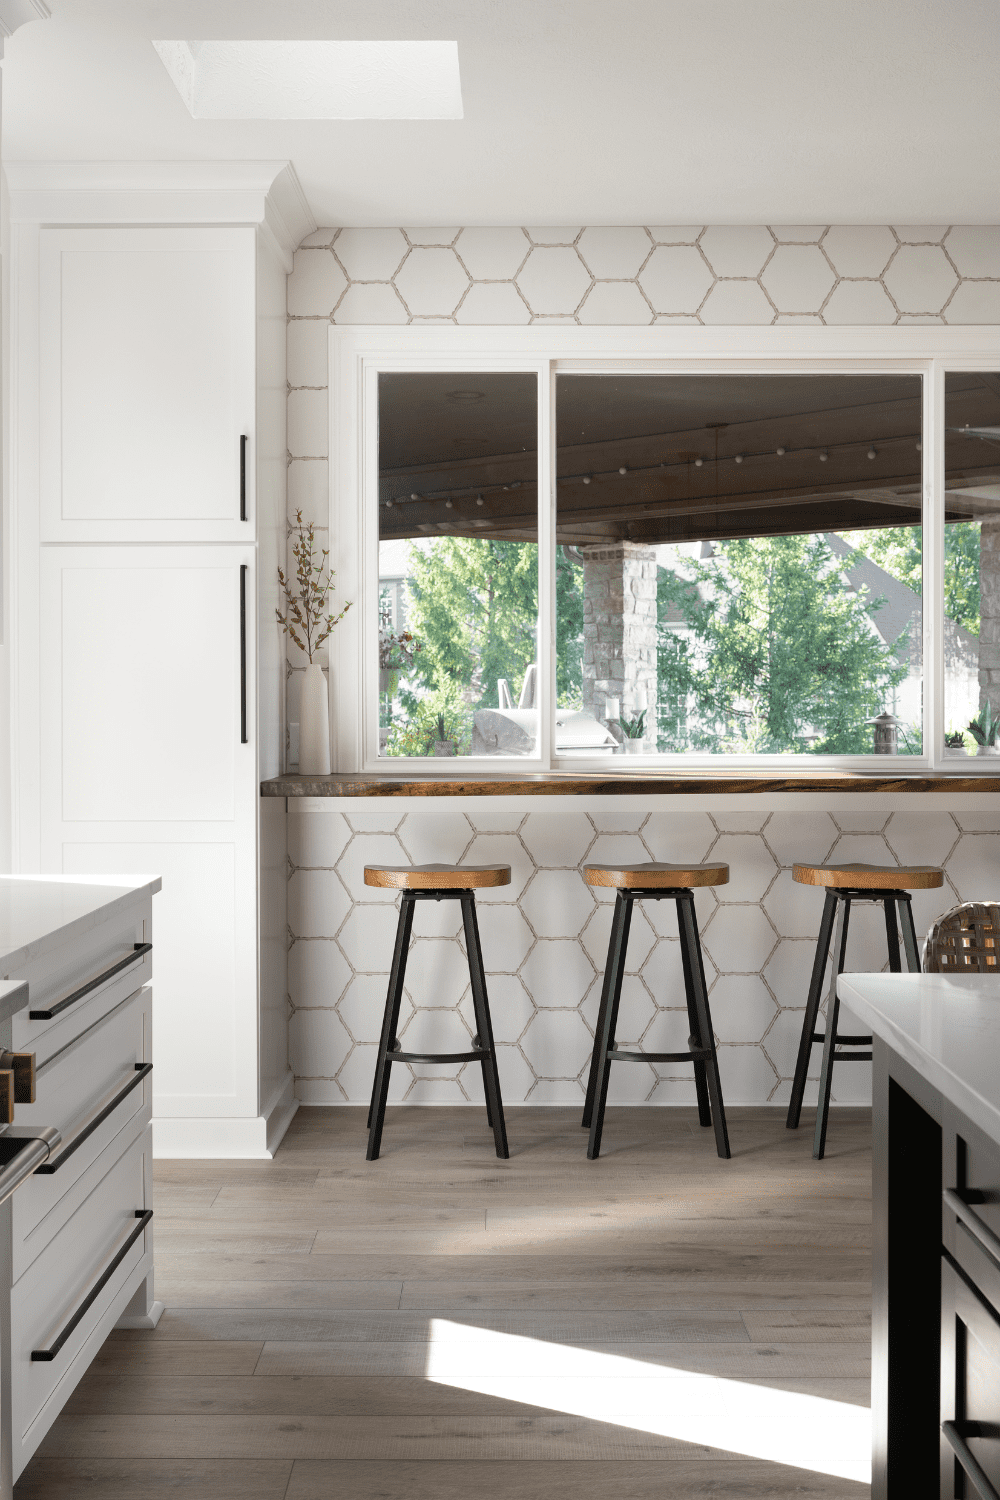 Nicholas Design Build | An image of a kitchen with white cabinets and stools.